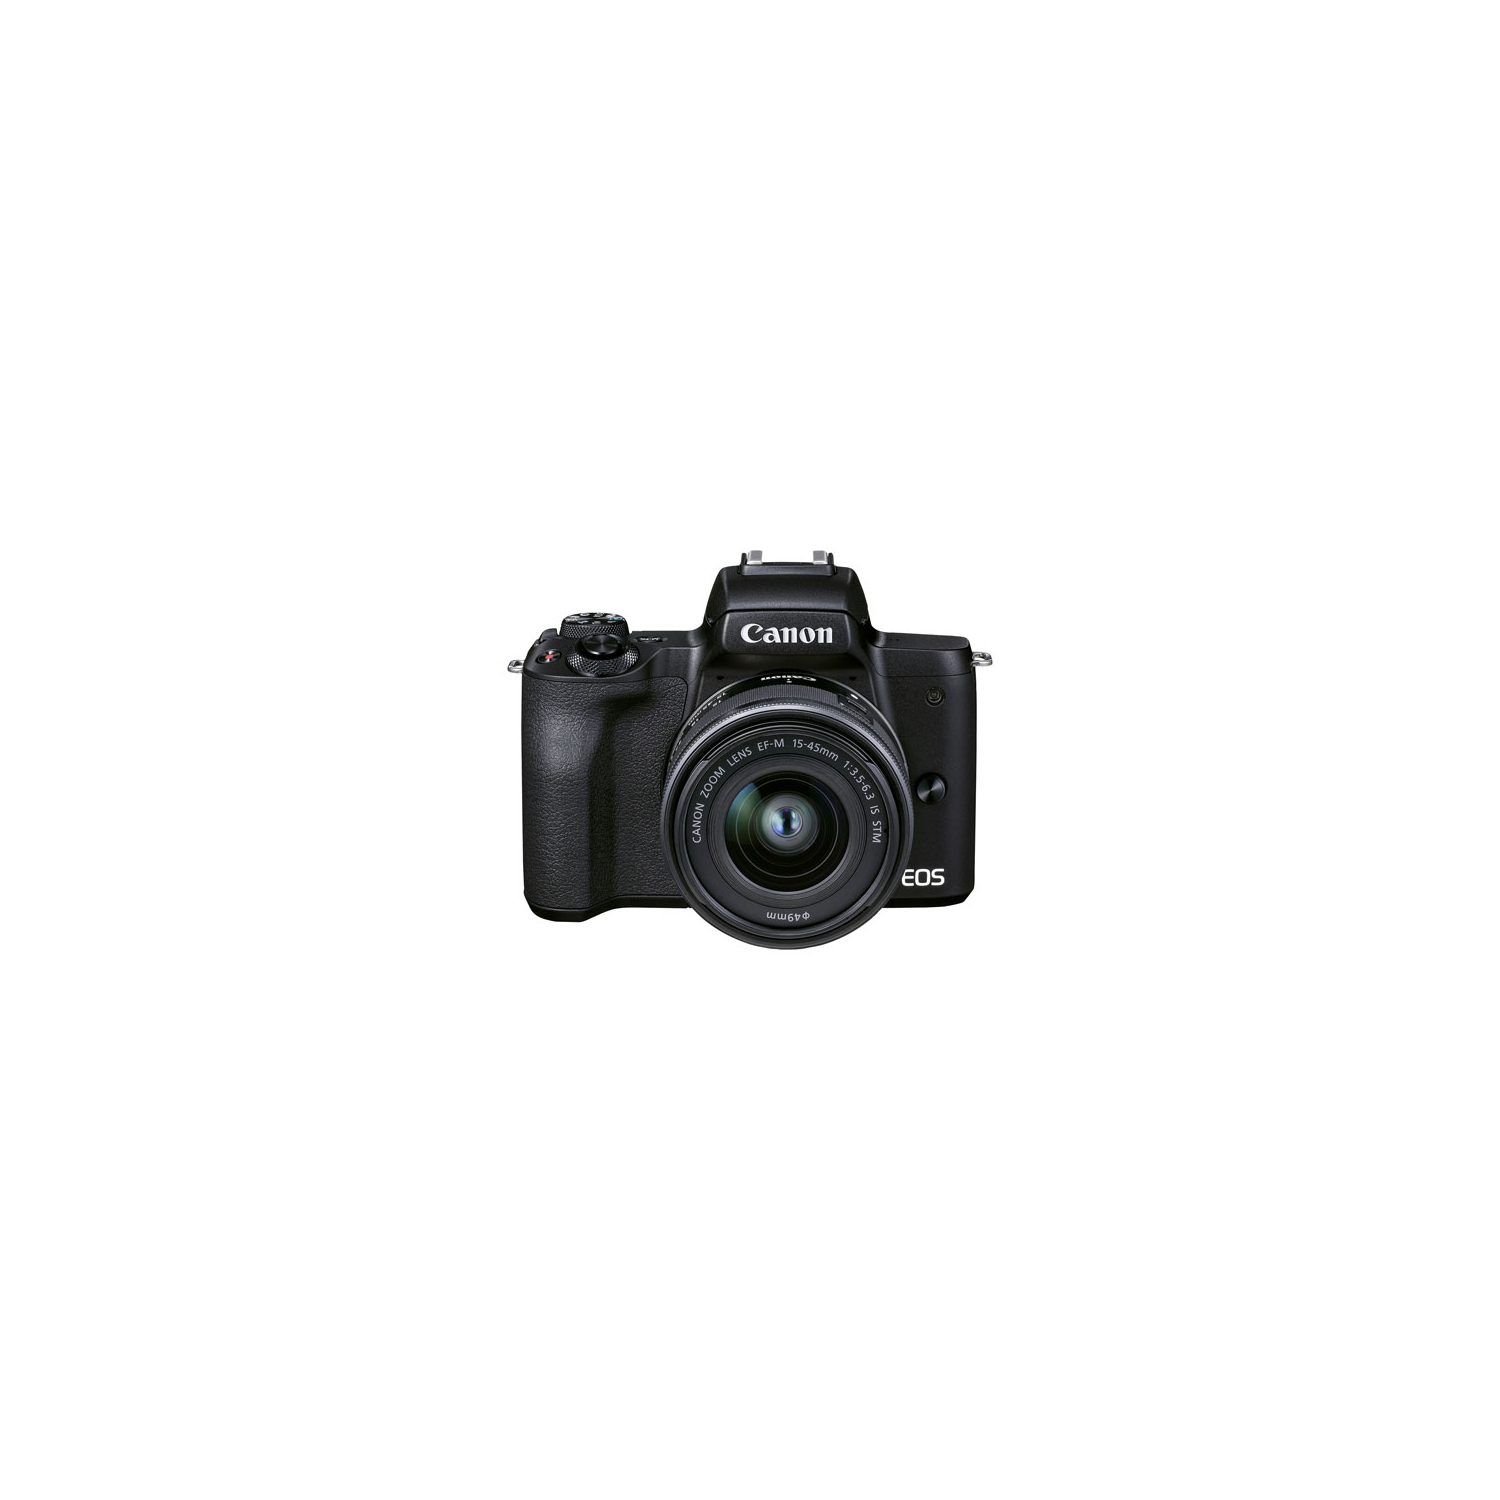 Refurbished (Fair) - Canon EOS M50 Mark II Mirrorless Camera with 15-45mm IS STM Lens Kit